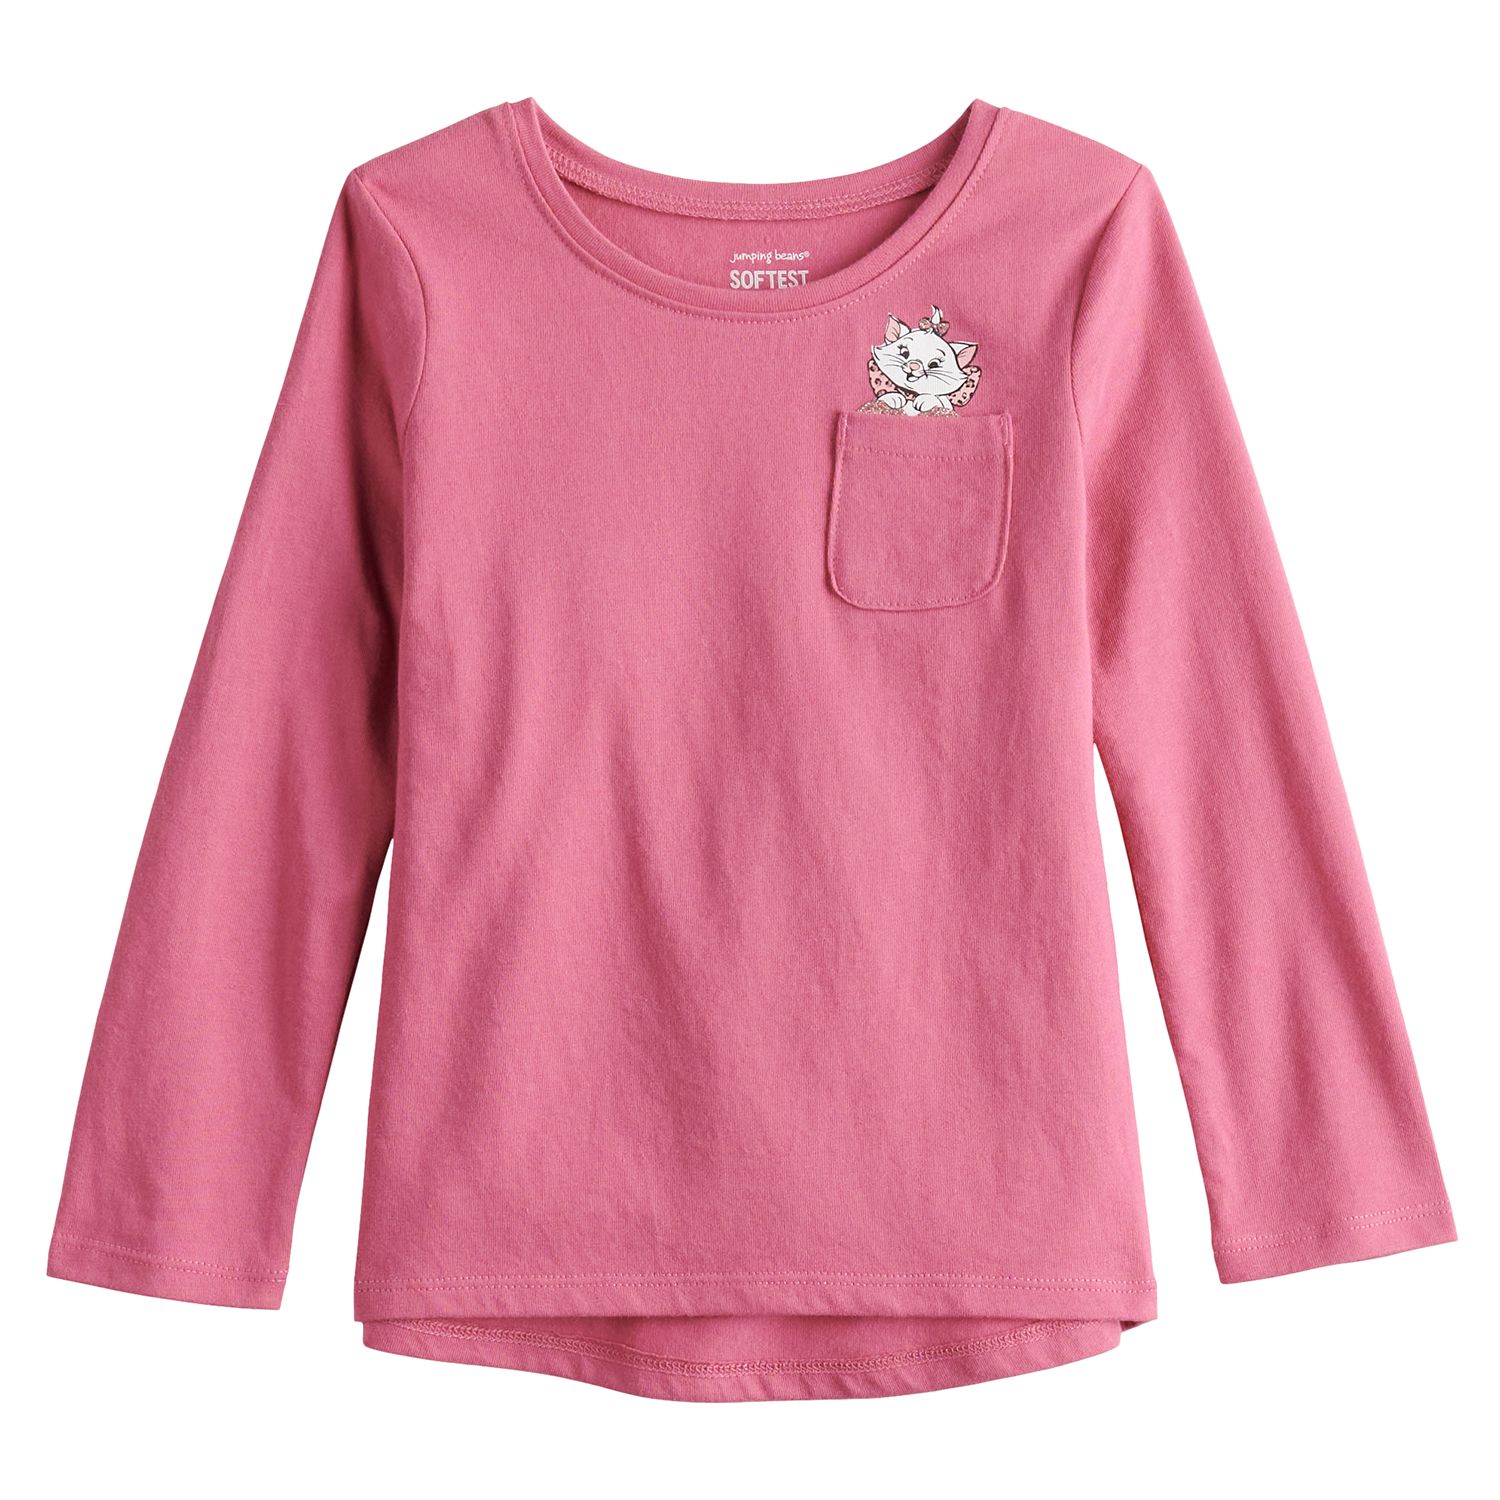 Image for Disney/Jumping Beans Disney's Toddler Girl Pocket Tee by Jumping Beans® at Kohl's.